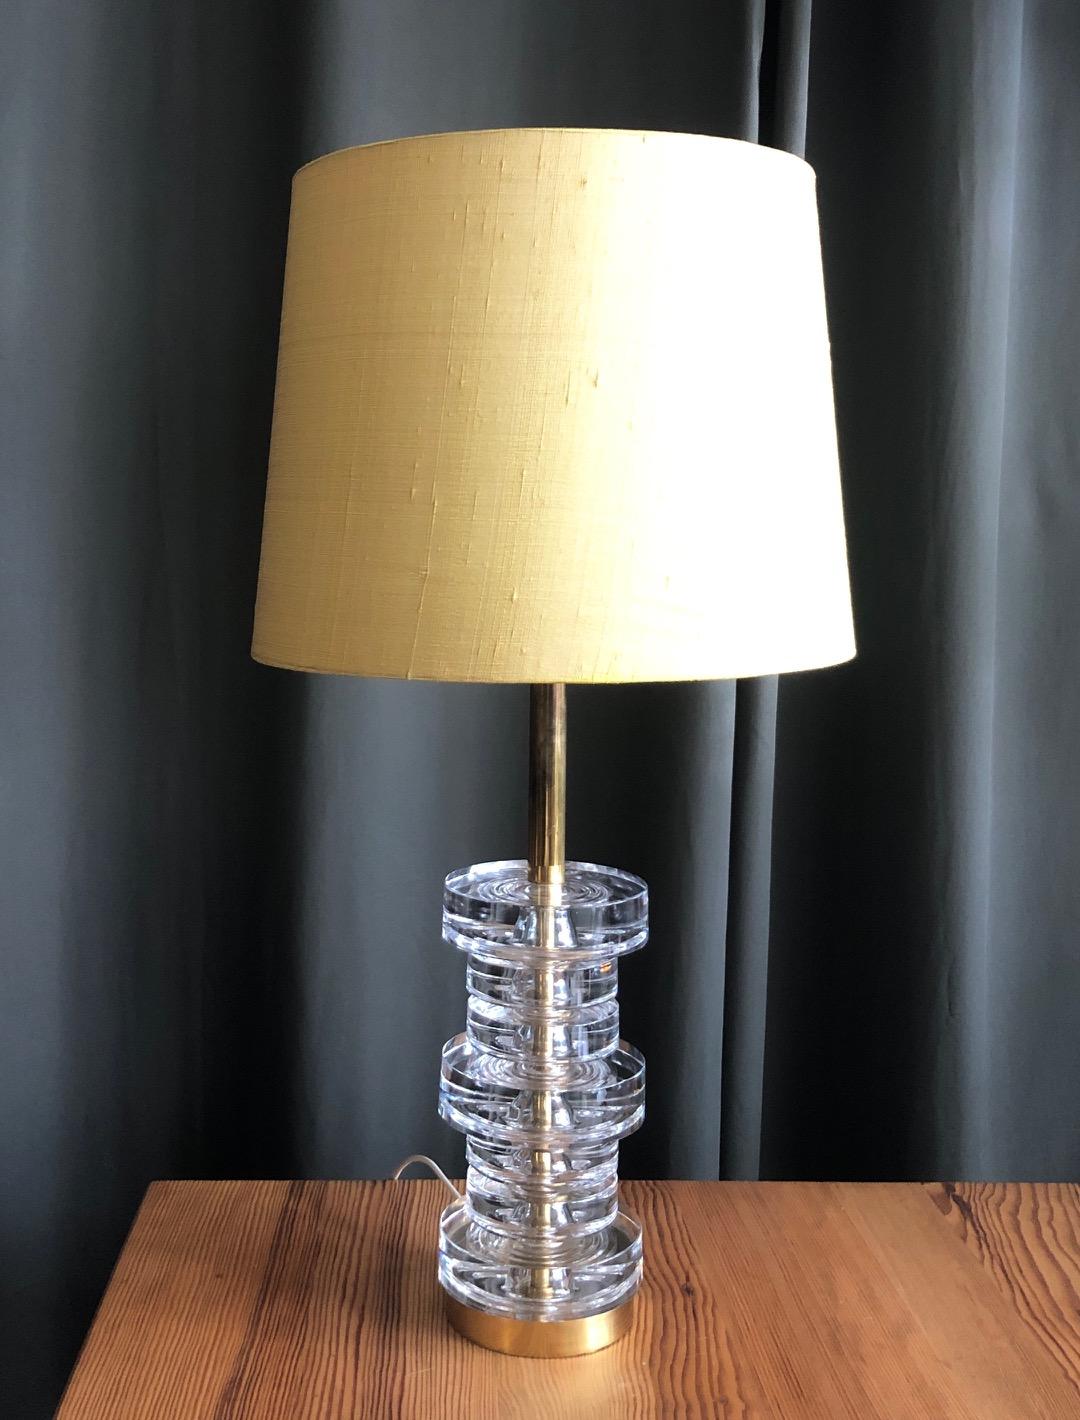 A table lamp designed by Carl Fagerlund for Orrefors, Sweden, Circa 1960th. Model number RD1984.
Clear glass on brass stem. Diameter 4.5